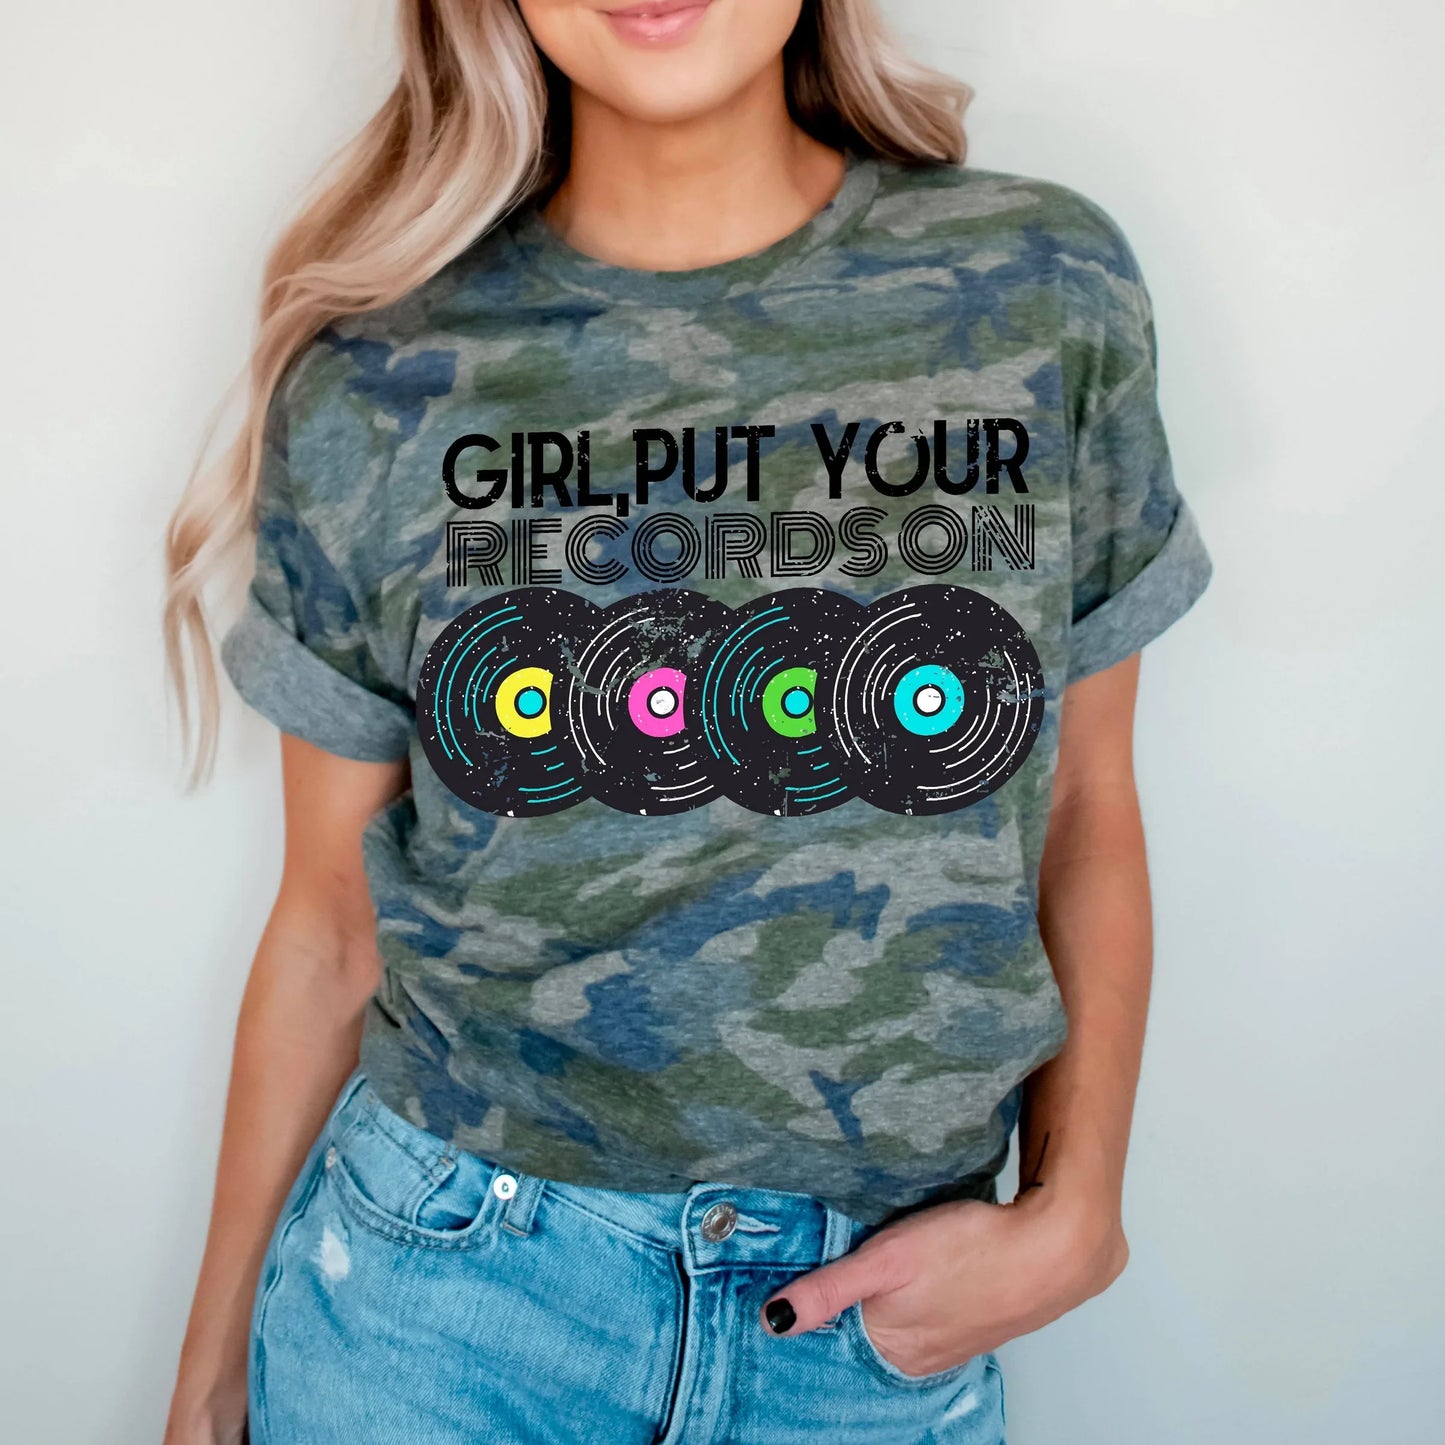 GIRL PUT YOUR RECORD ON Graphic tee